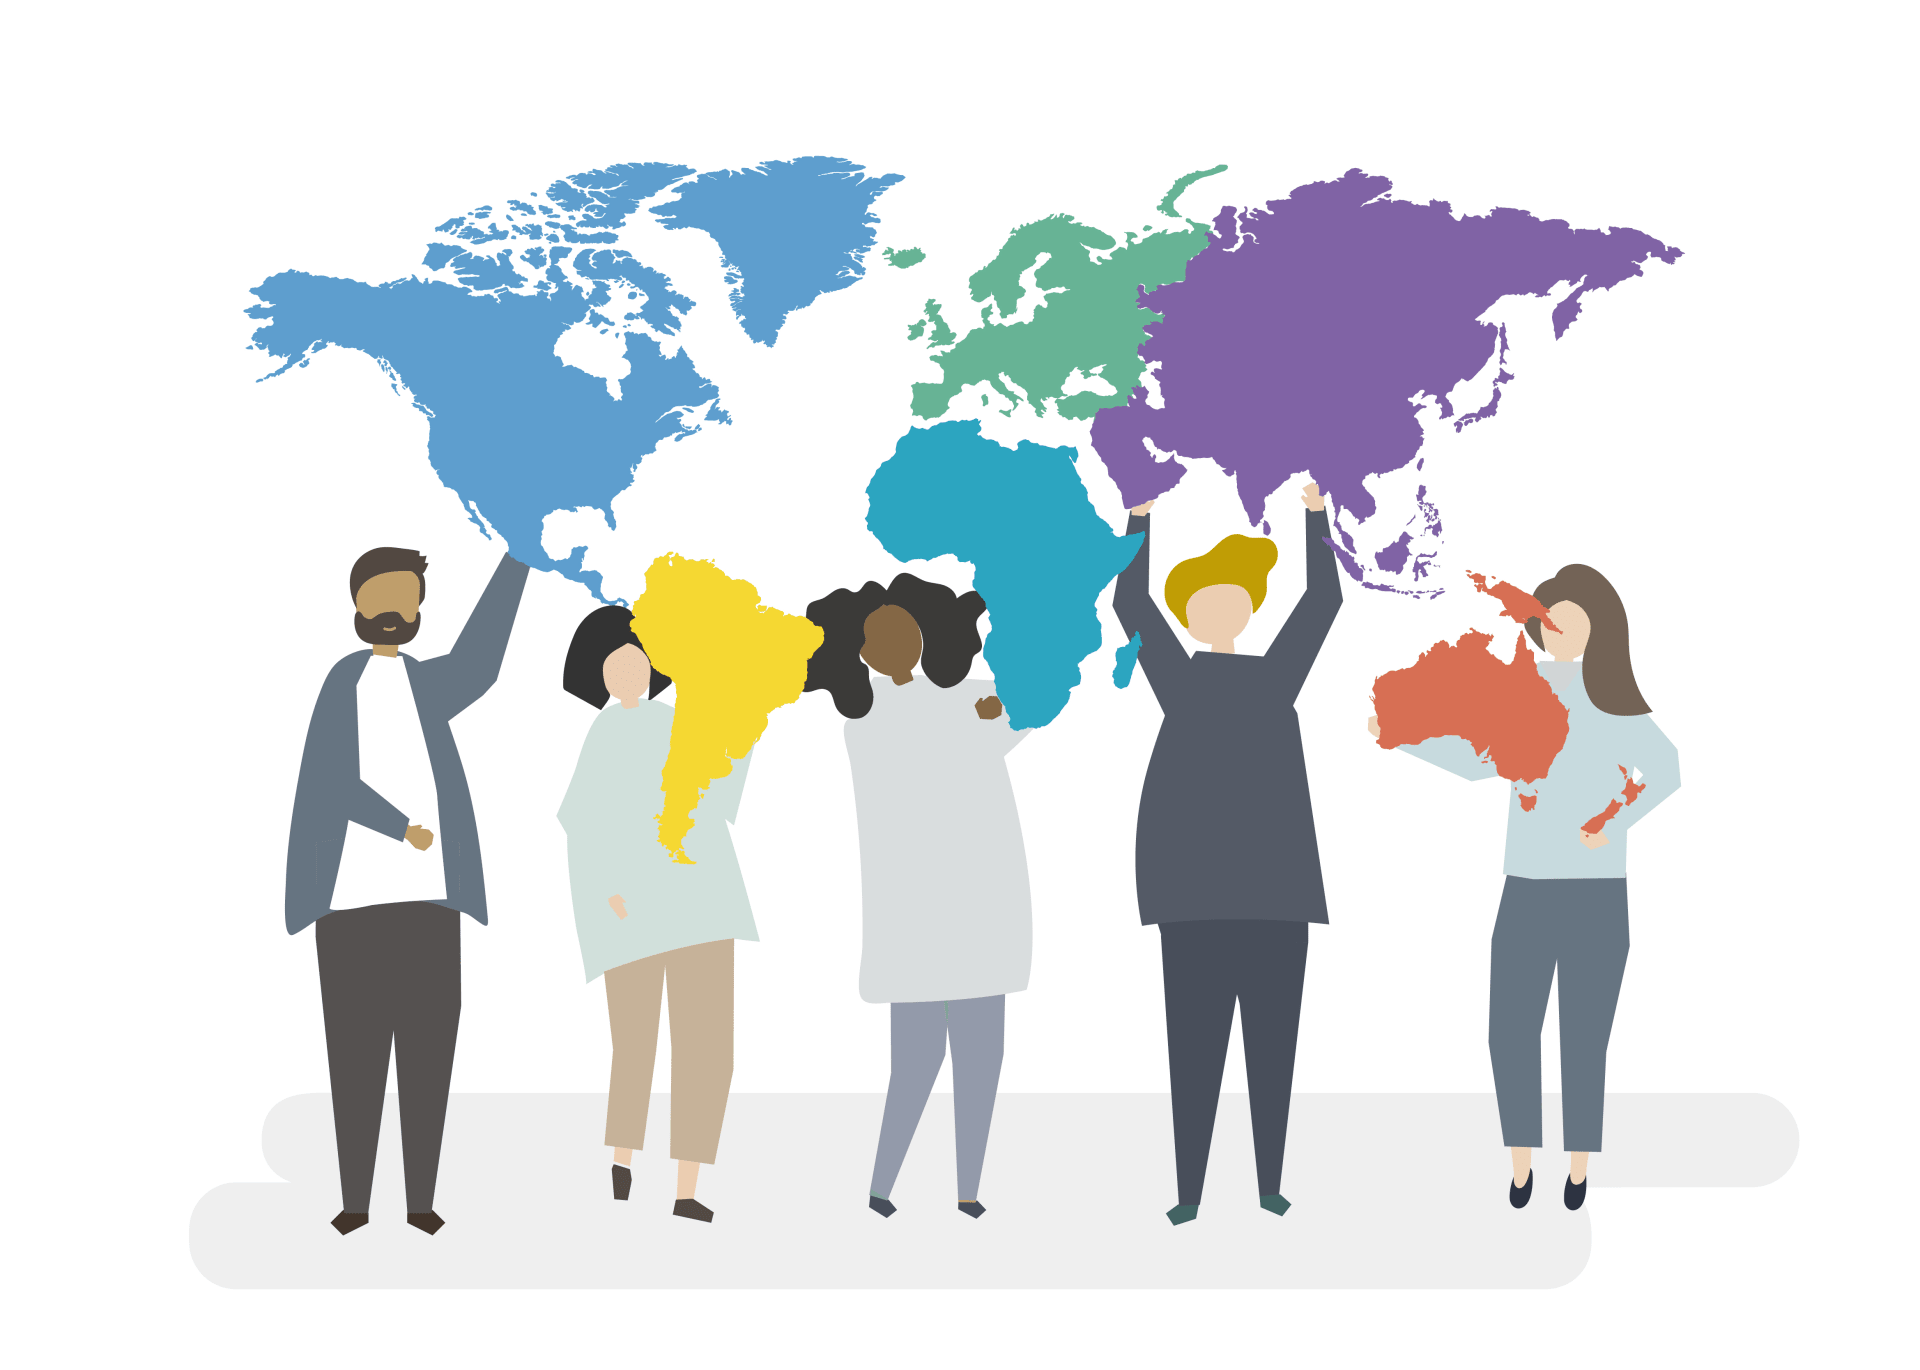 <a href="https://www.freepik.com/free-vector/illustration-multiracial-characters-with-global-concept_2921055.htm#query=diversity%20globe%20cartoon&position=48&from_view=search&track=ais">Image by rawpixel.com</a> on Freepik